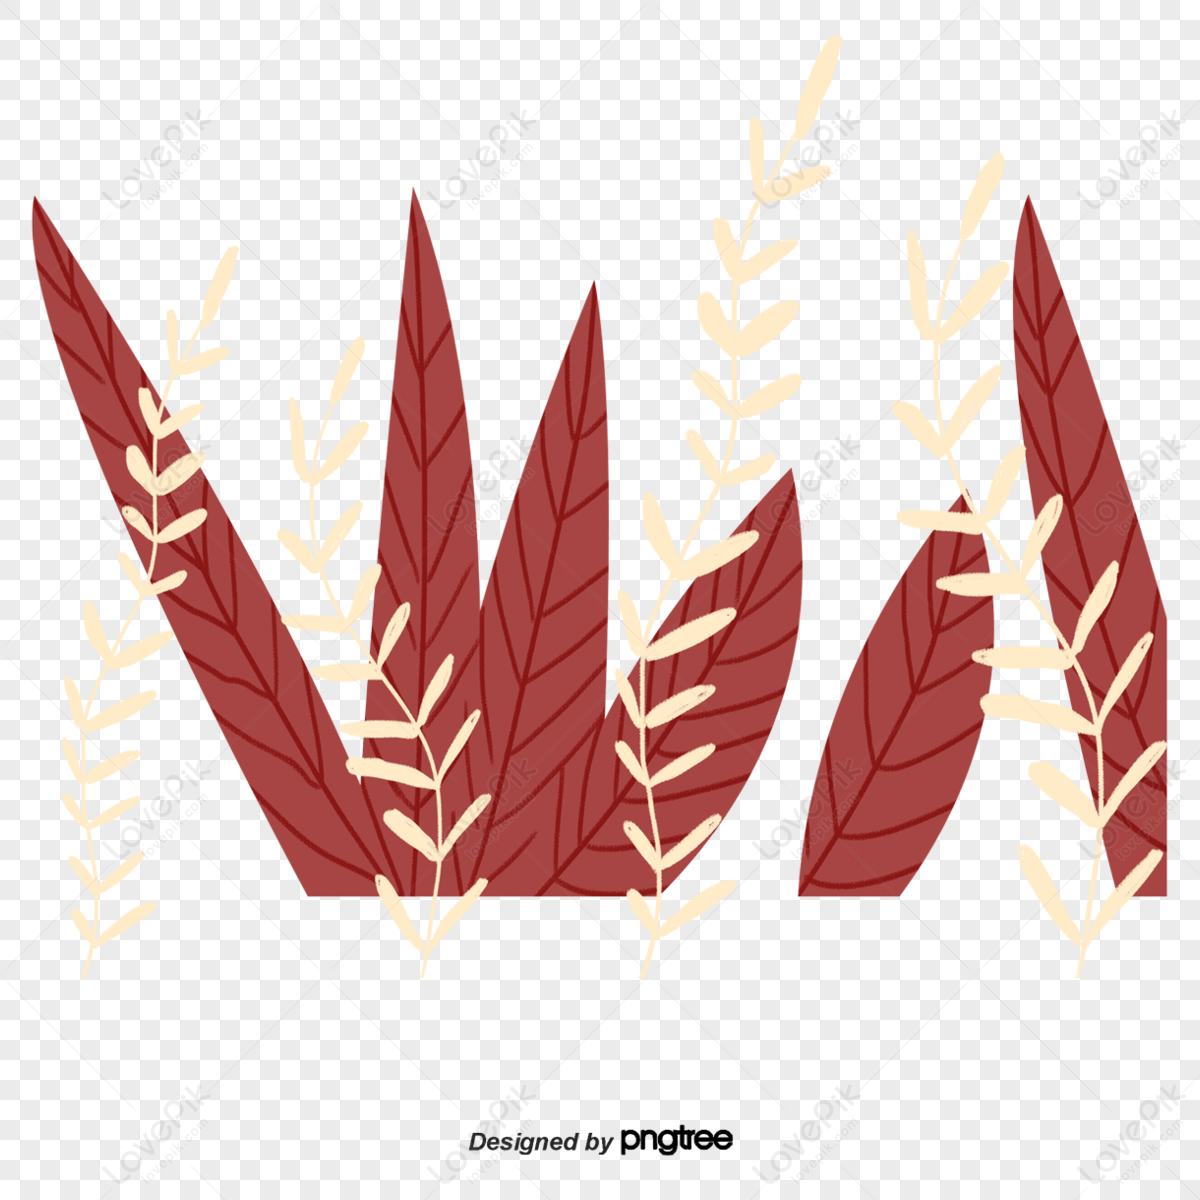 Slender PNG, Vector, PSD, and Clipart With Transparent Background